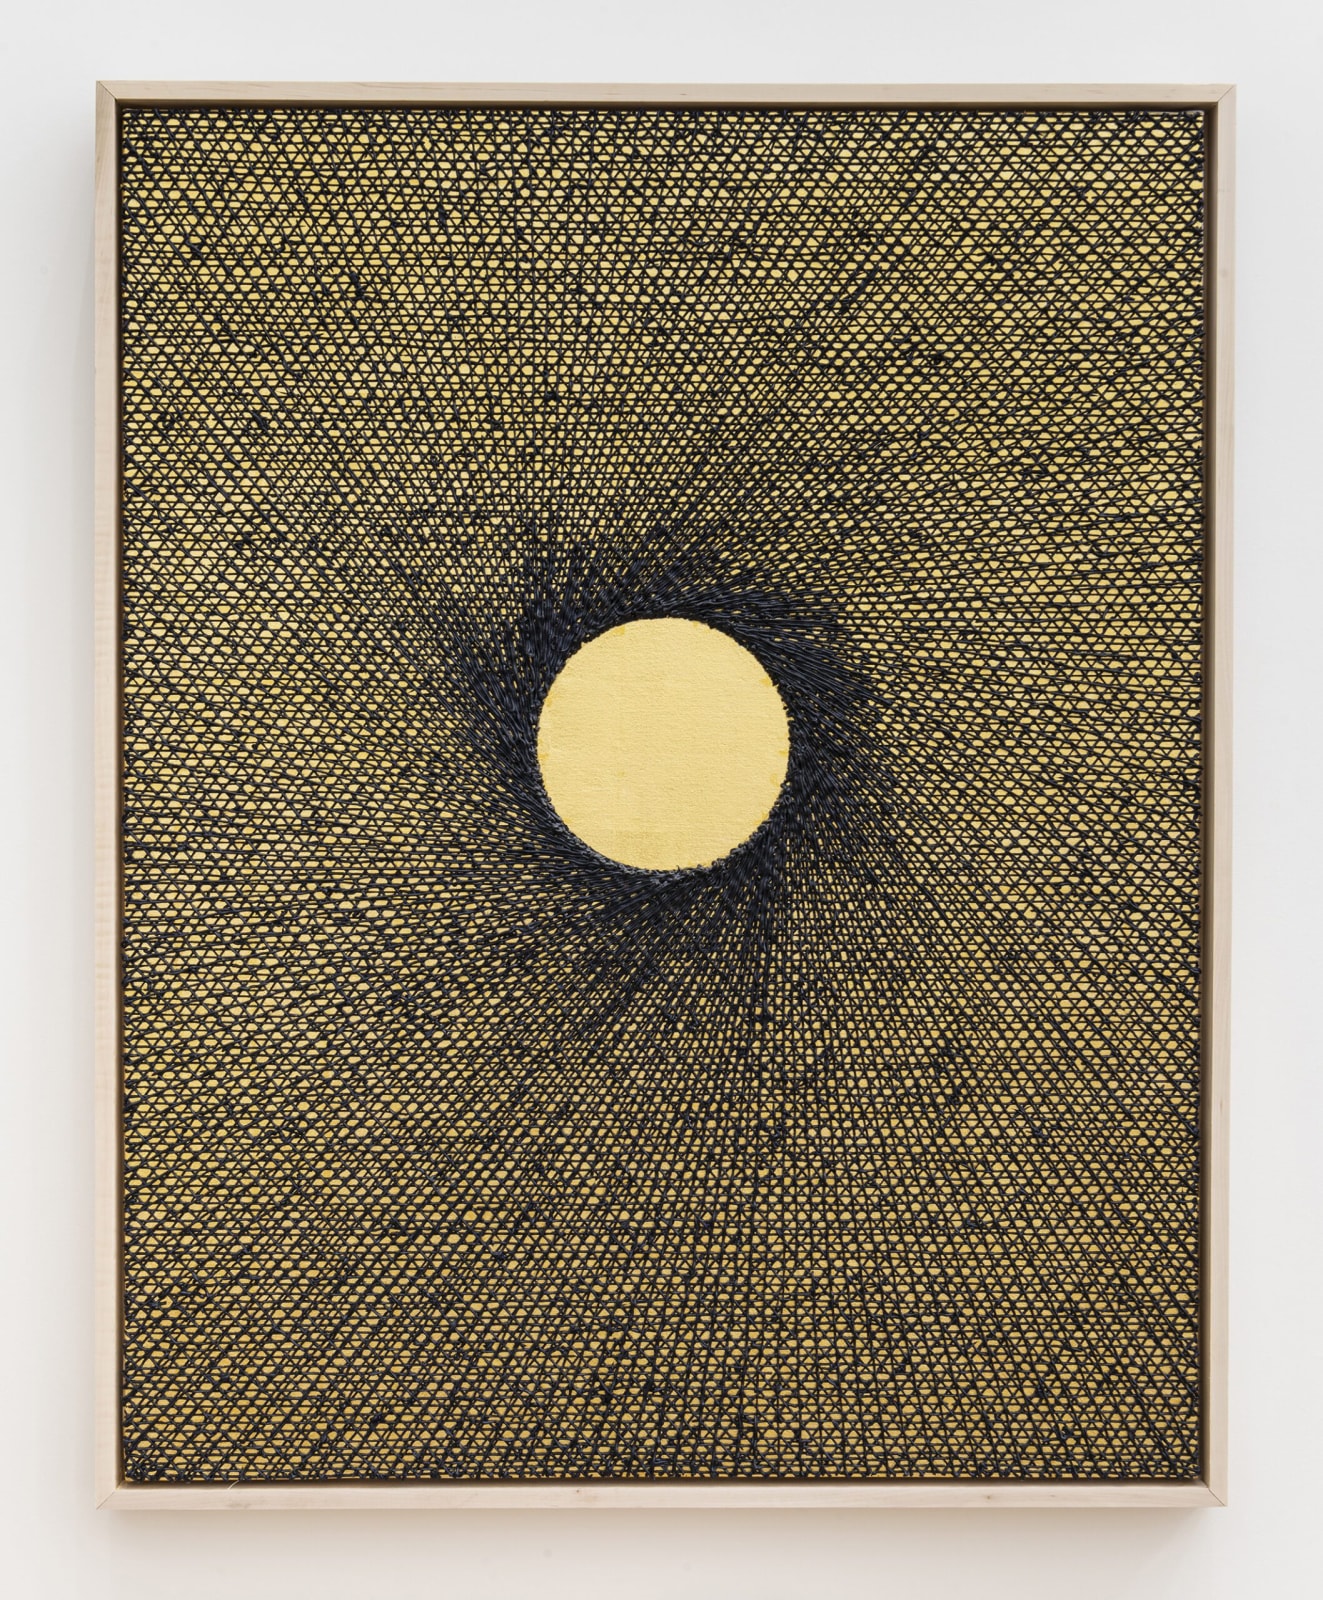 Michael Brown, End of the Harvest Moon, 2022